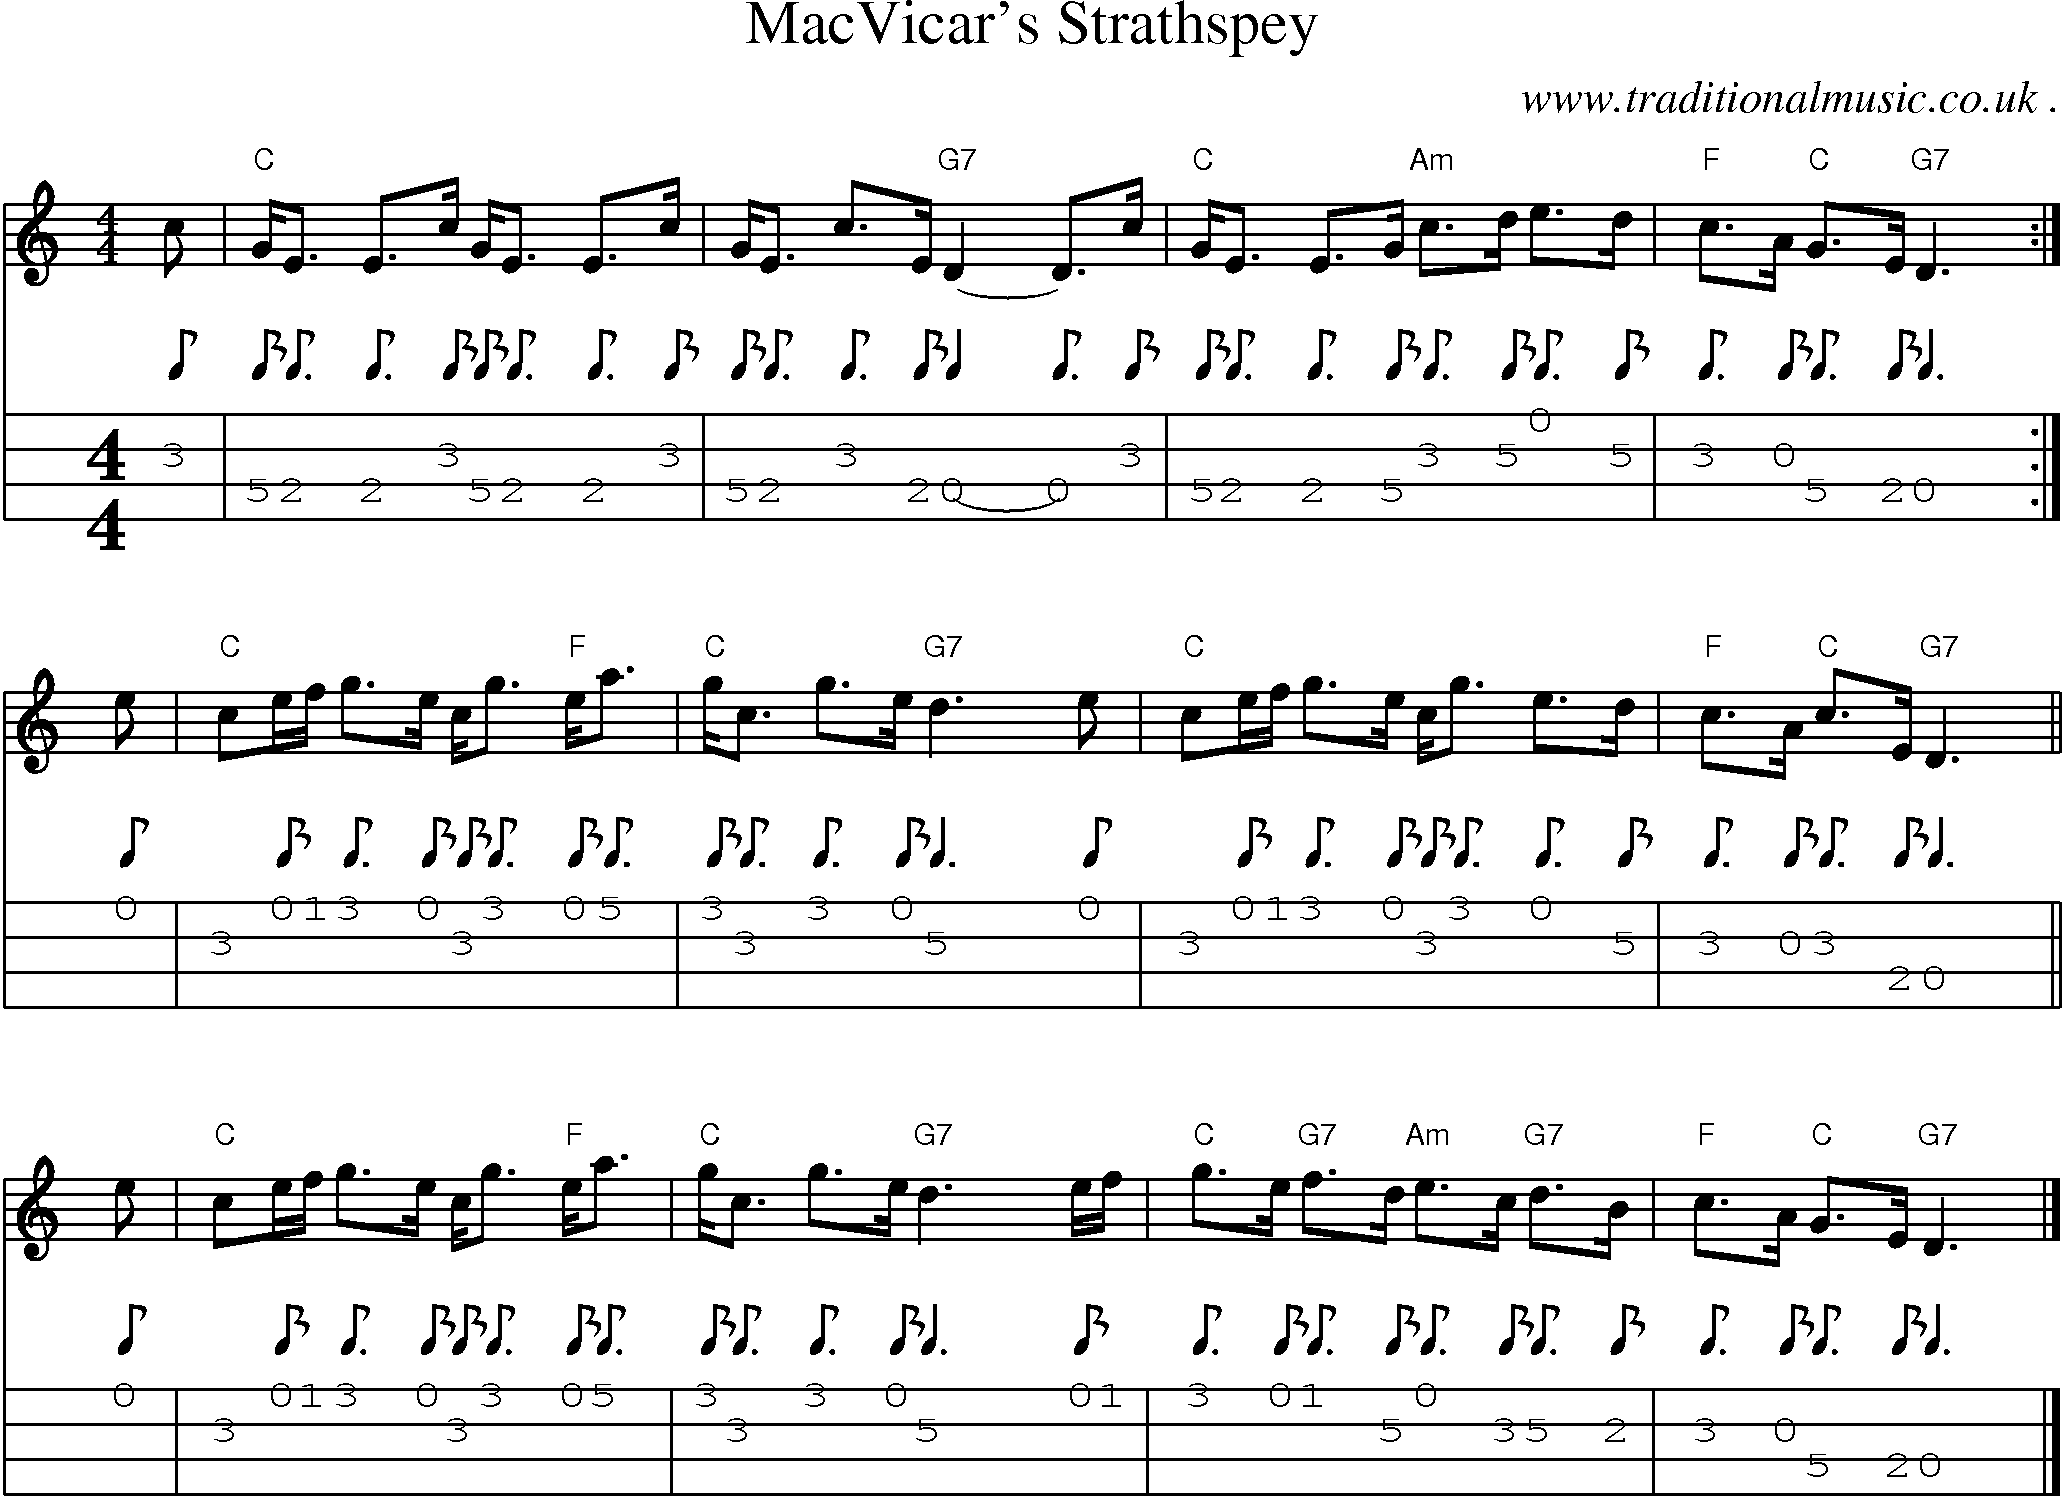 Sheet-music  score, Chords and Mandolin Tabs for Macvicars Strathspey